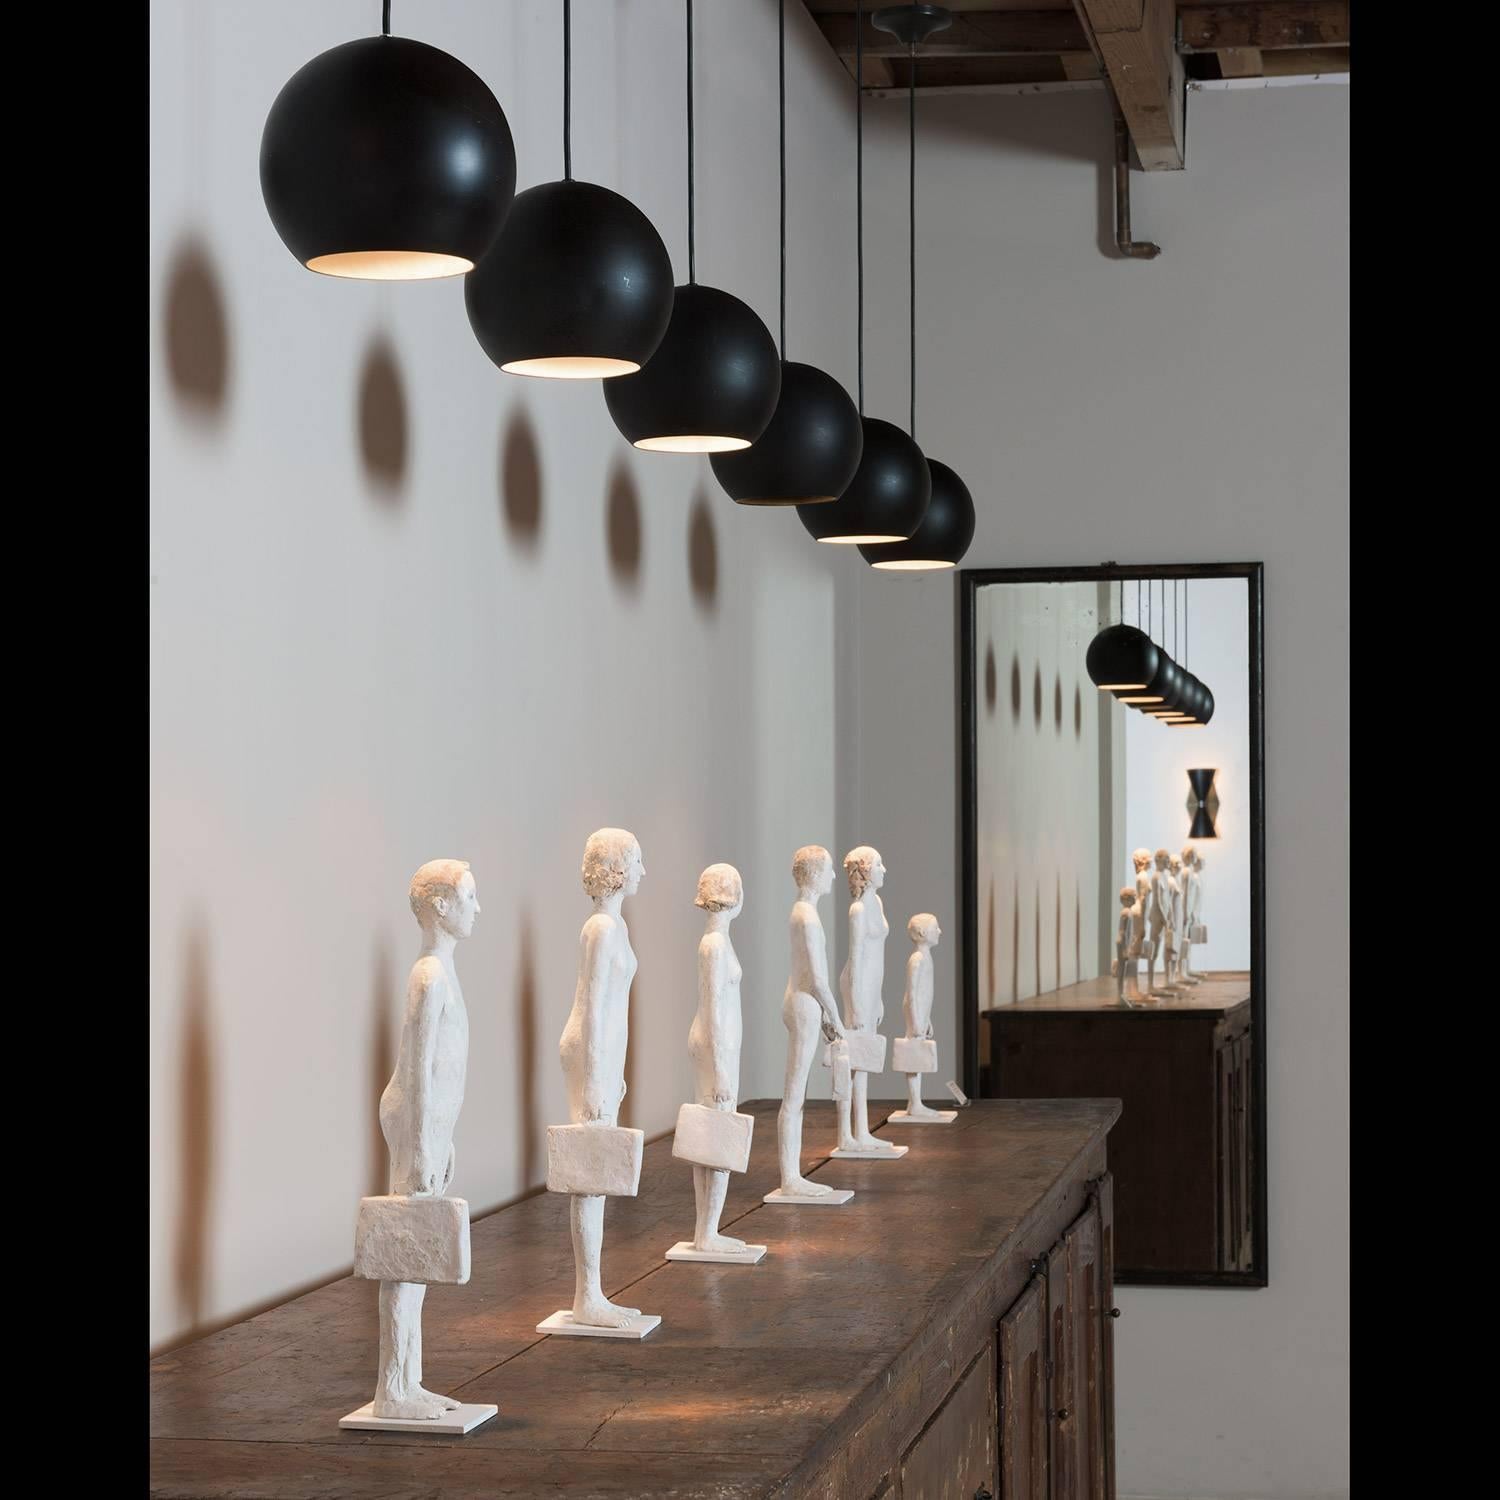 Stilnovo Black Metal Pendant, circa 1960. These pendants were purchased in Italy from Tecno/Borsani and were originally installed in the Tecno retail store in Milan.

They can be seen in the latest Borsani book (image included.)